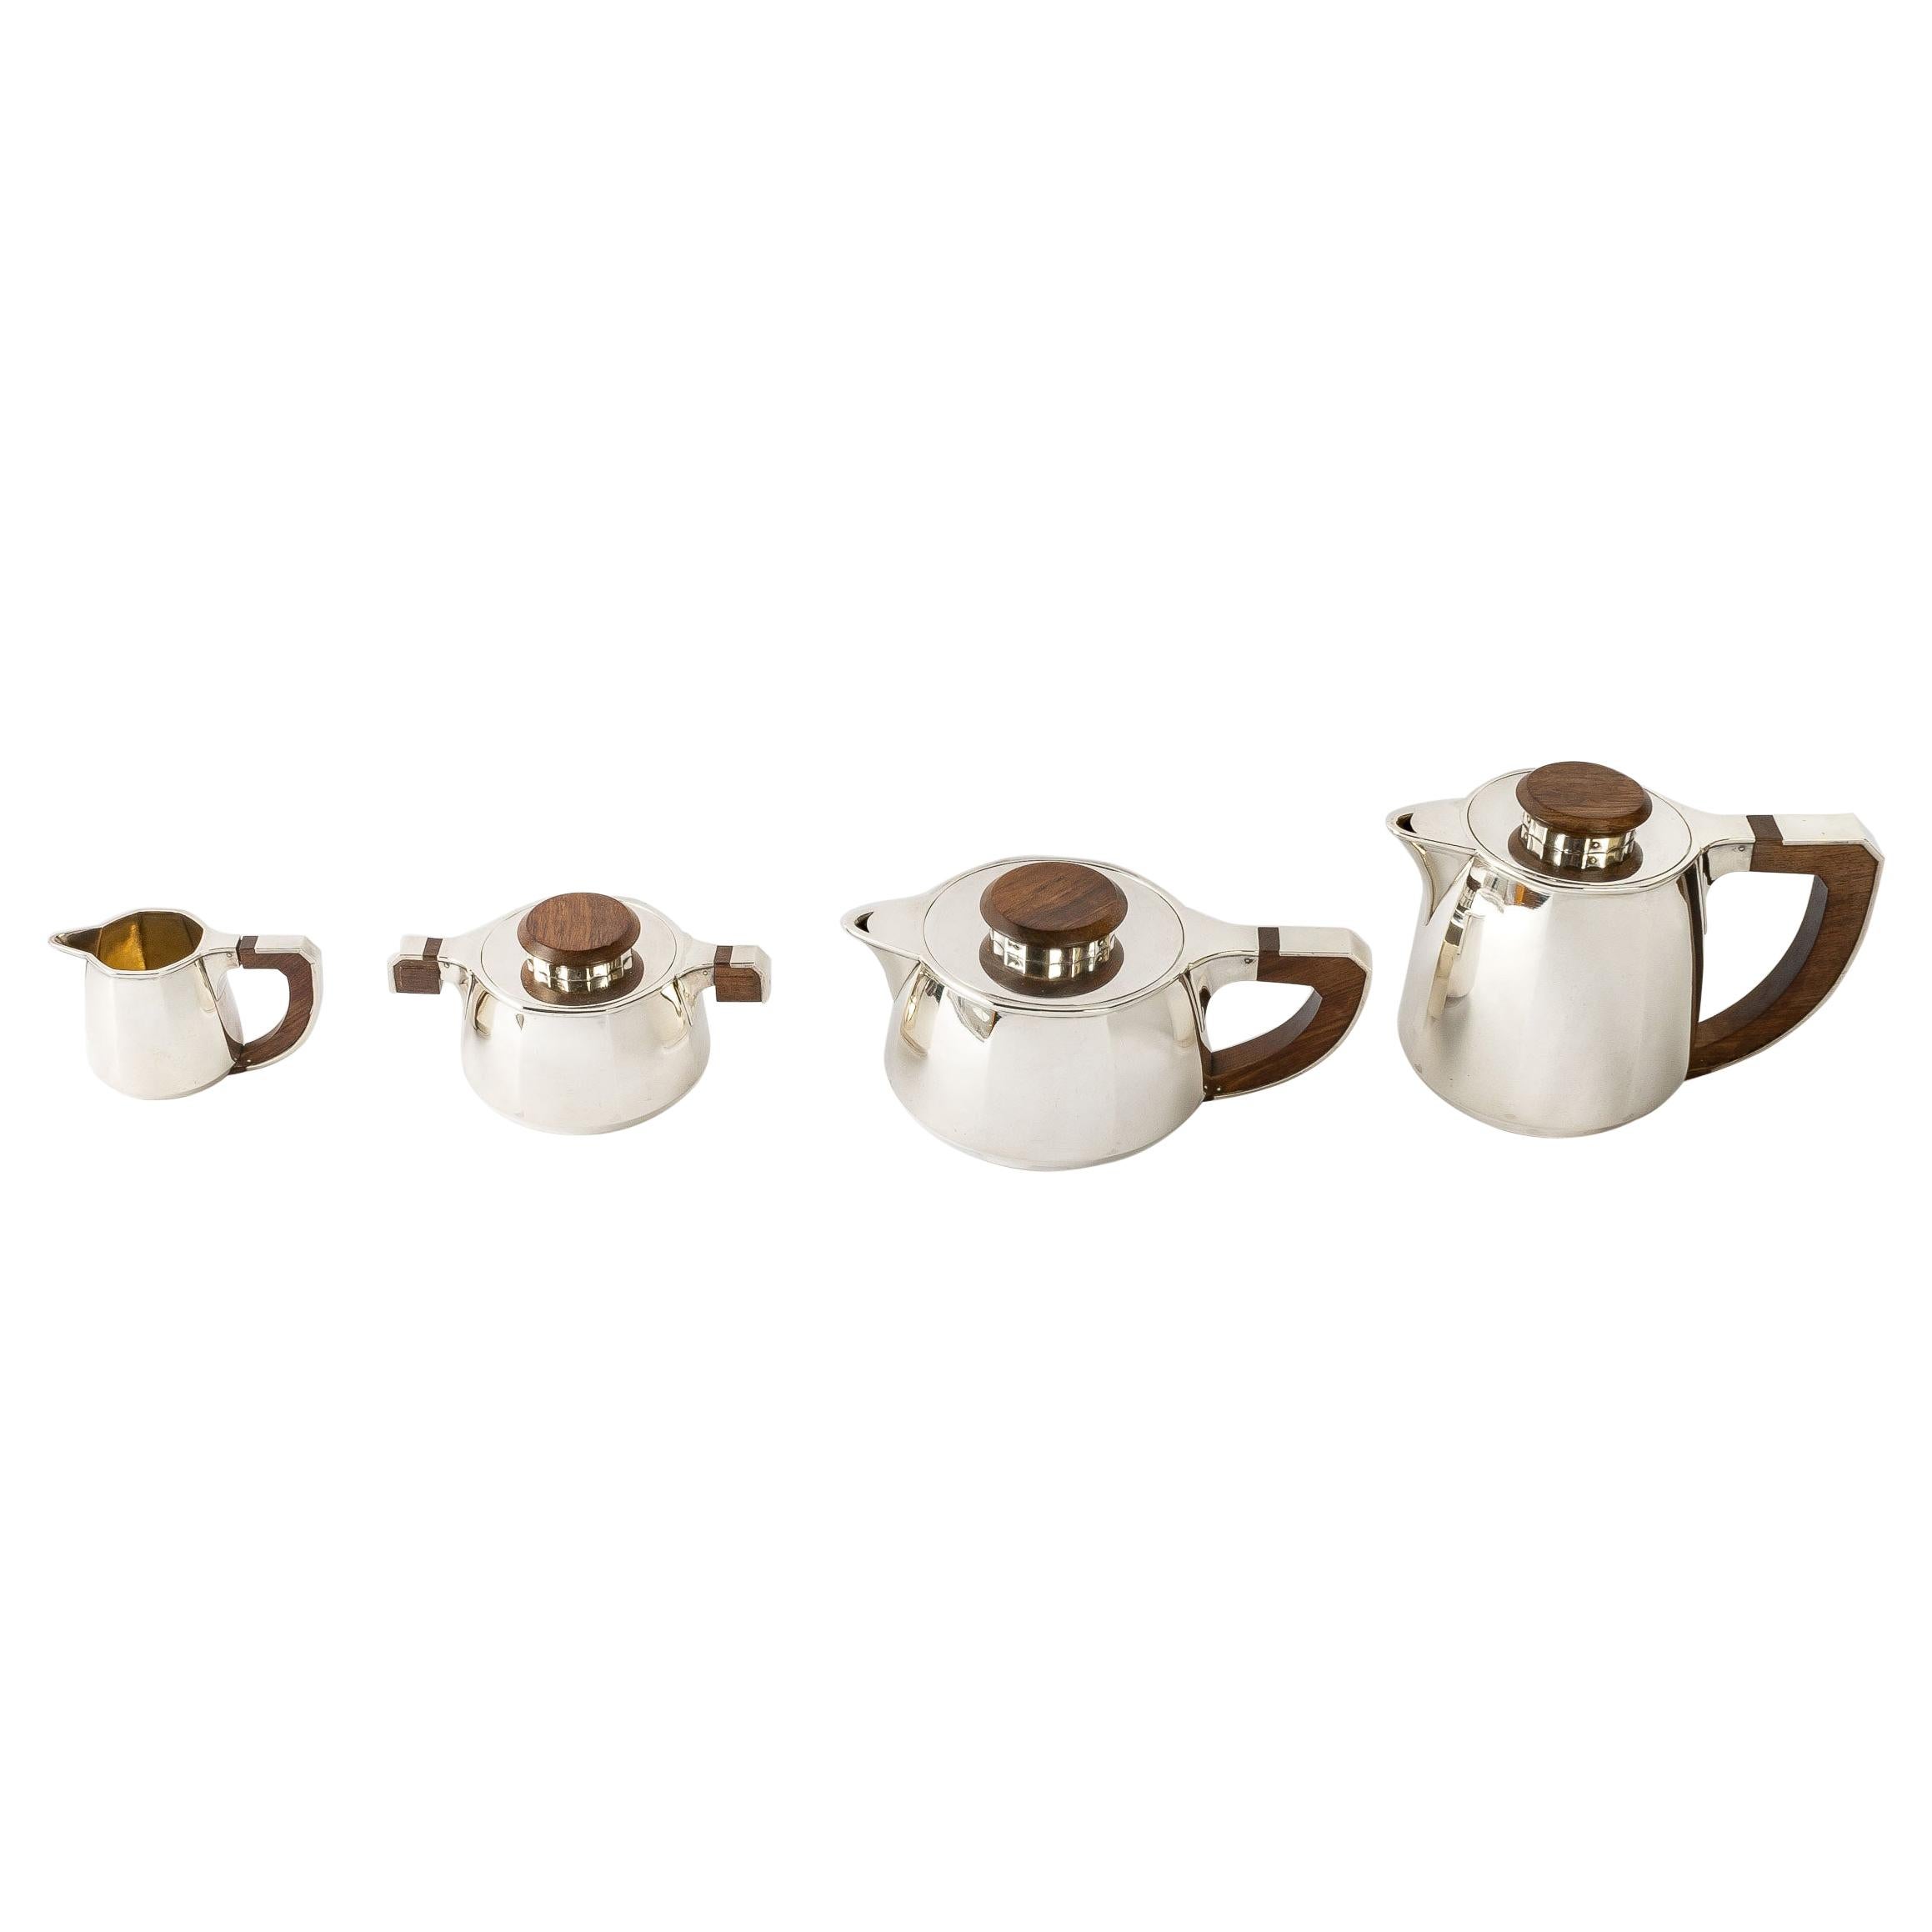 1920 Jean E. Puiforcat, Tea and Coffee Set in Sterling Silver and Rosewood